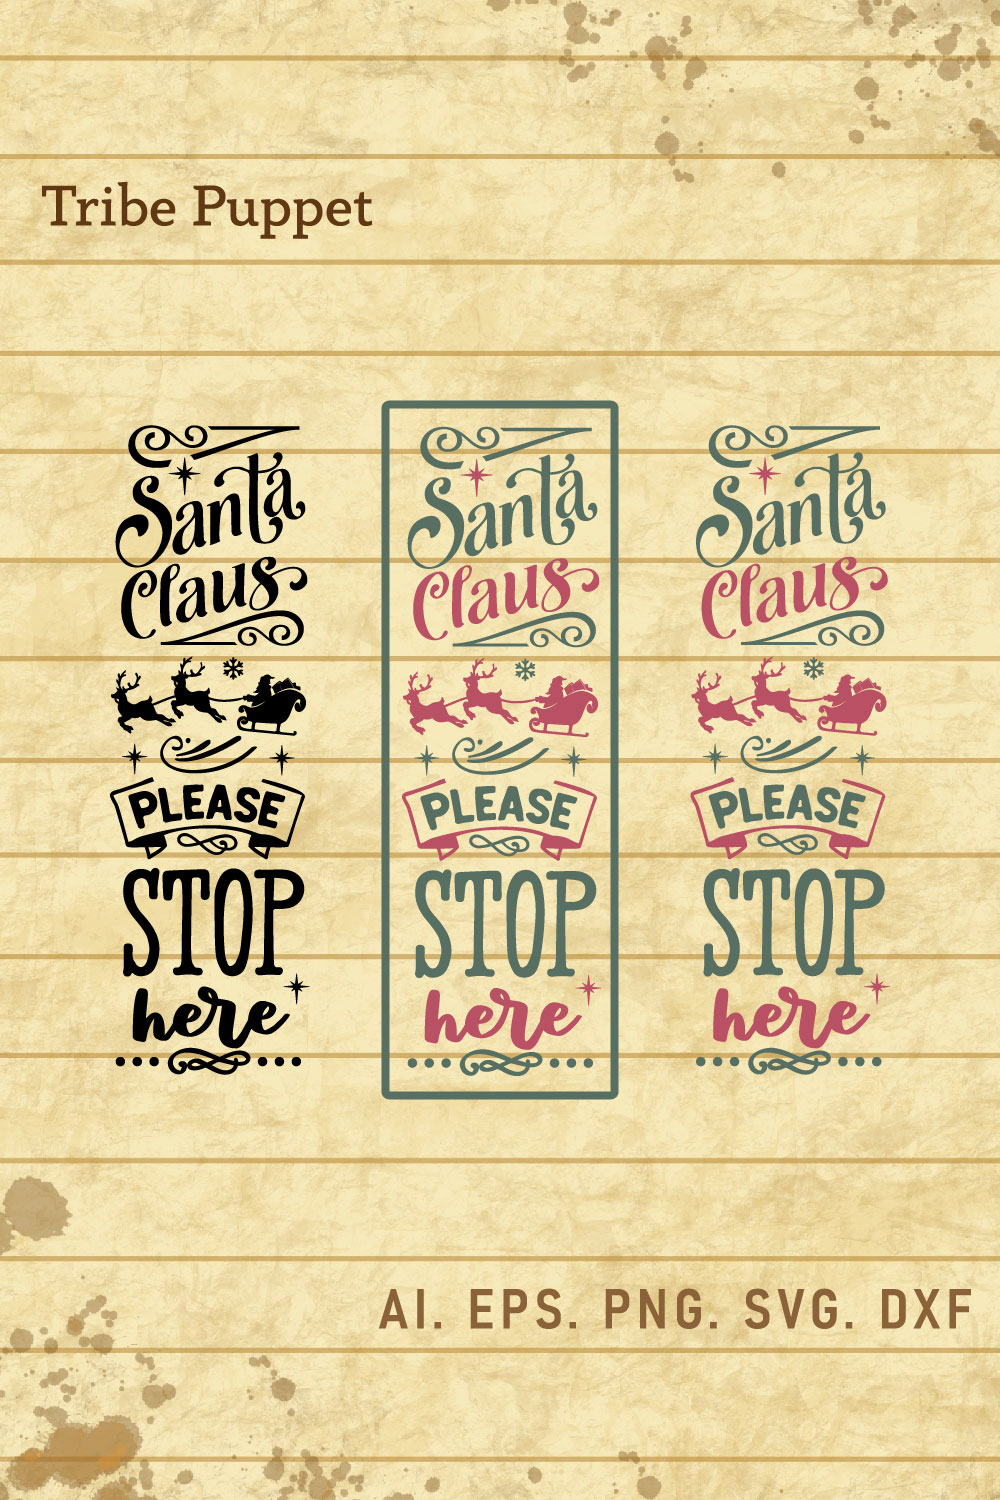 Christmas porch sign pinterest preview image.